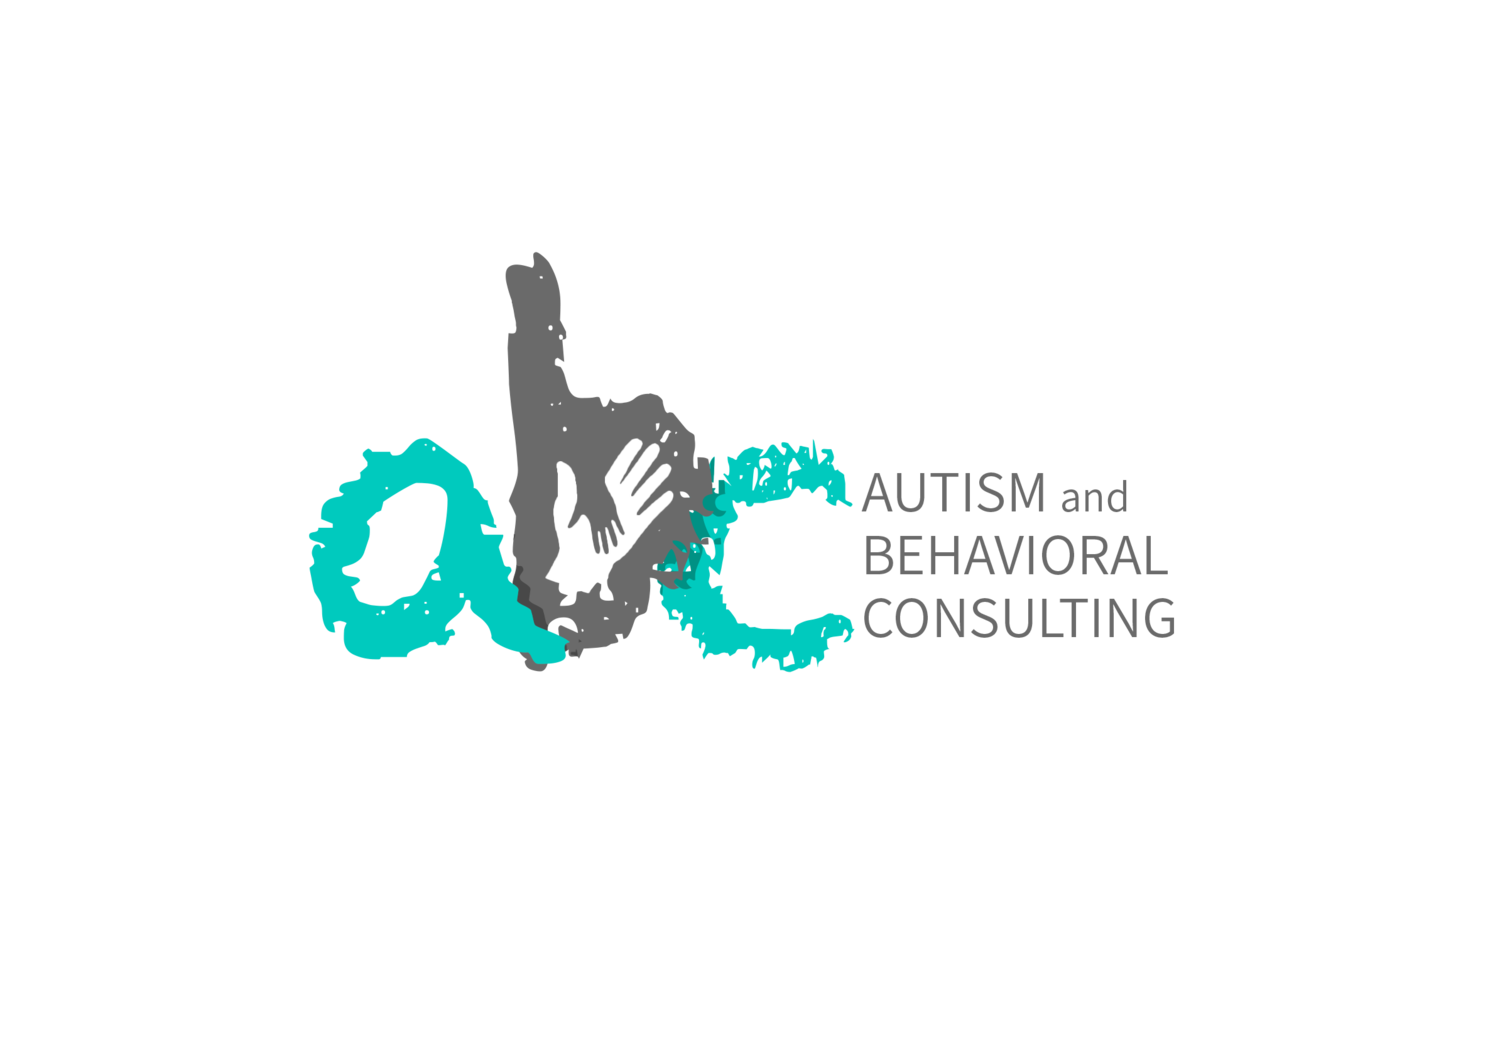 Autism and Behavioral Consulting